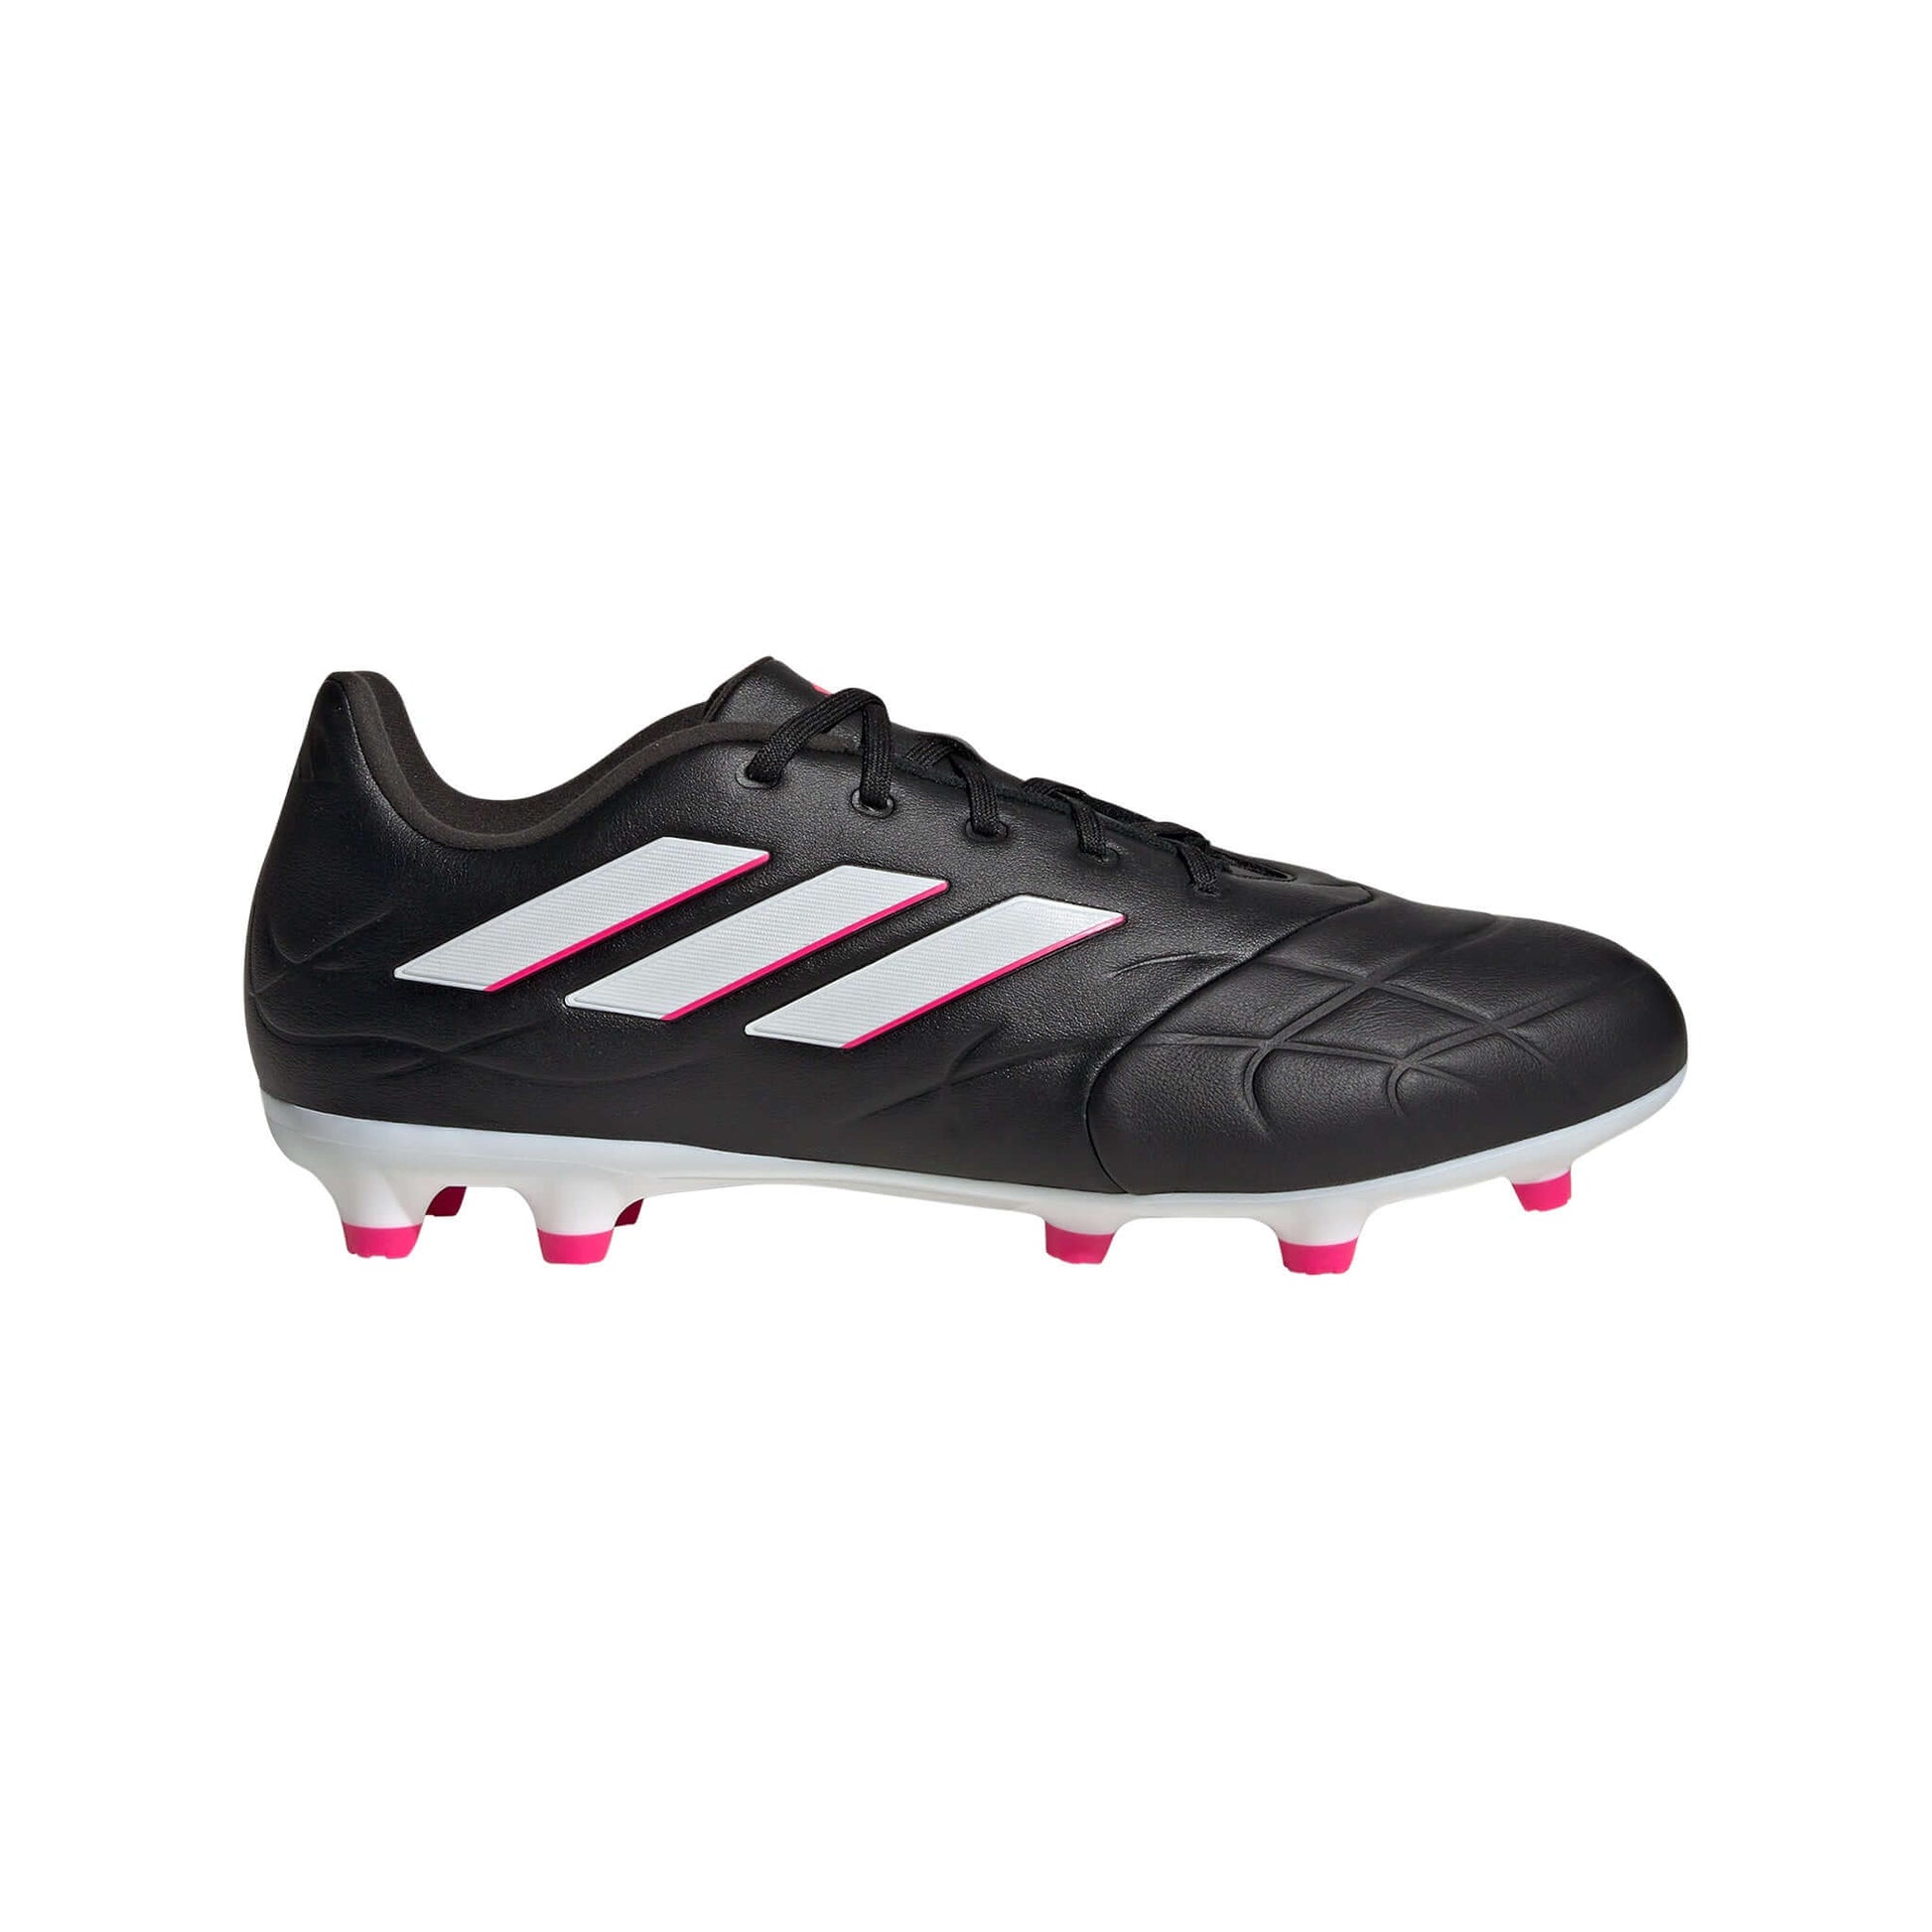 Copa Pure.3 Firm Ground Cleats | EvangelistaSports.com | Canada's Premiere Soccer Store